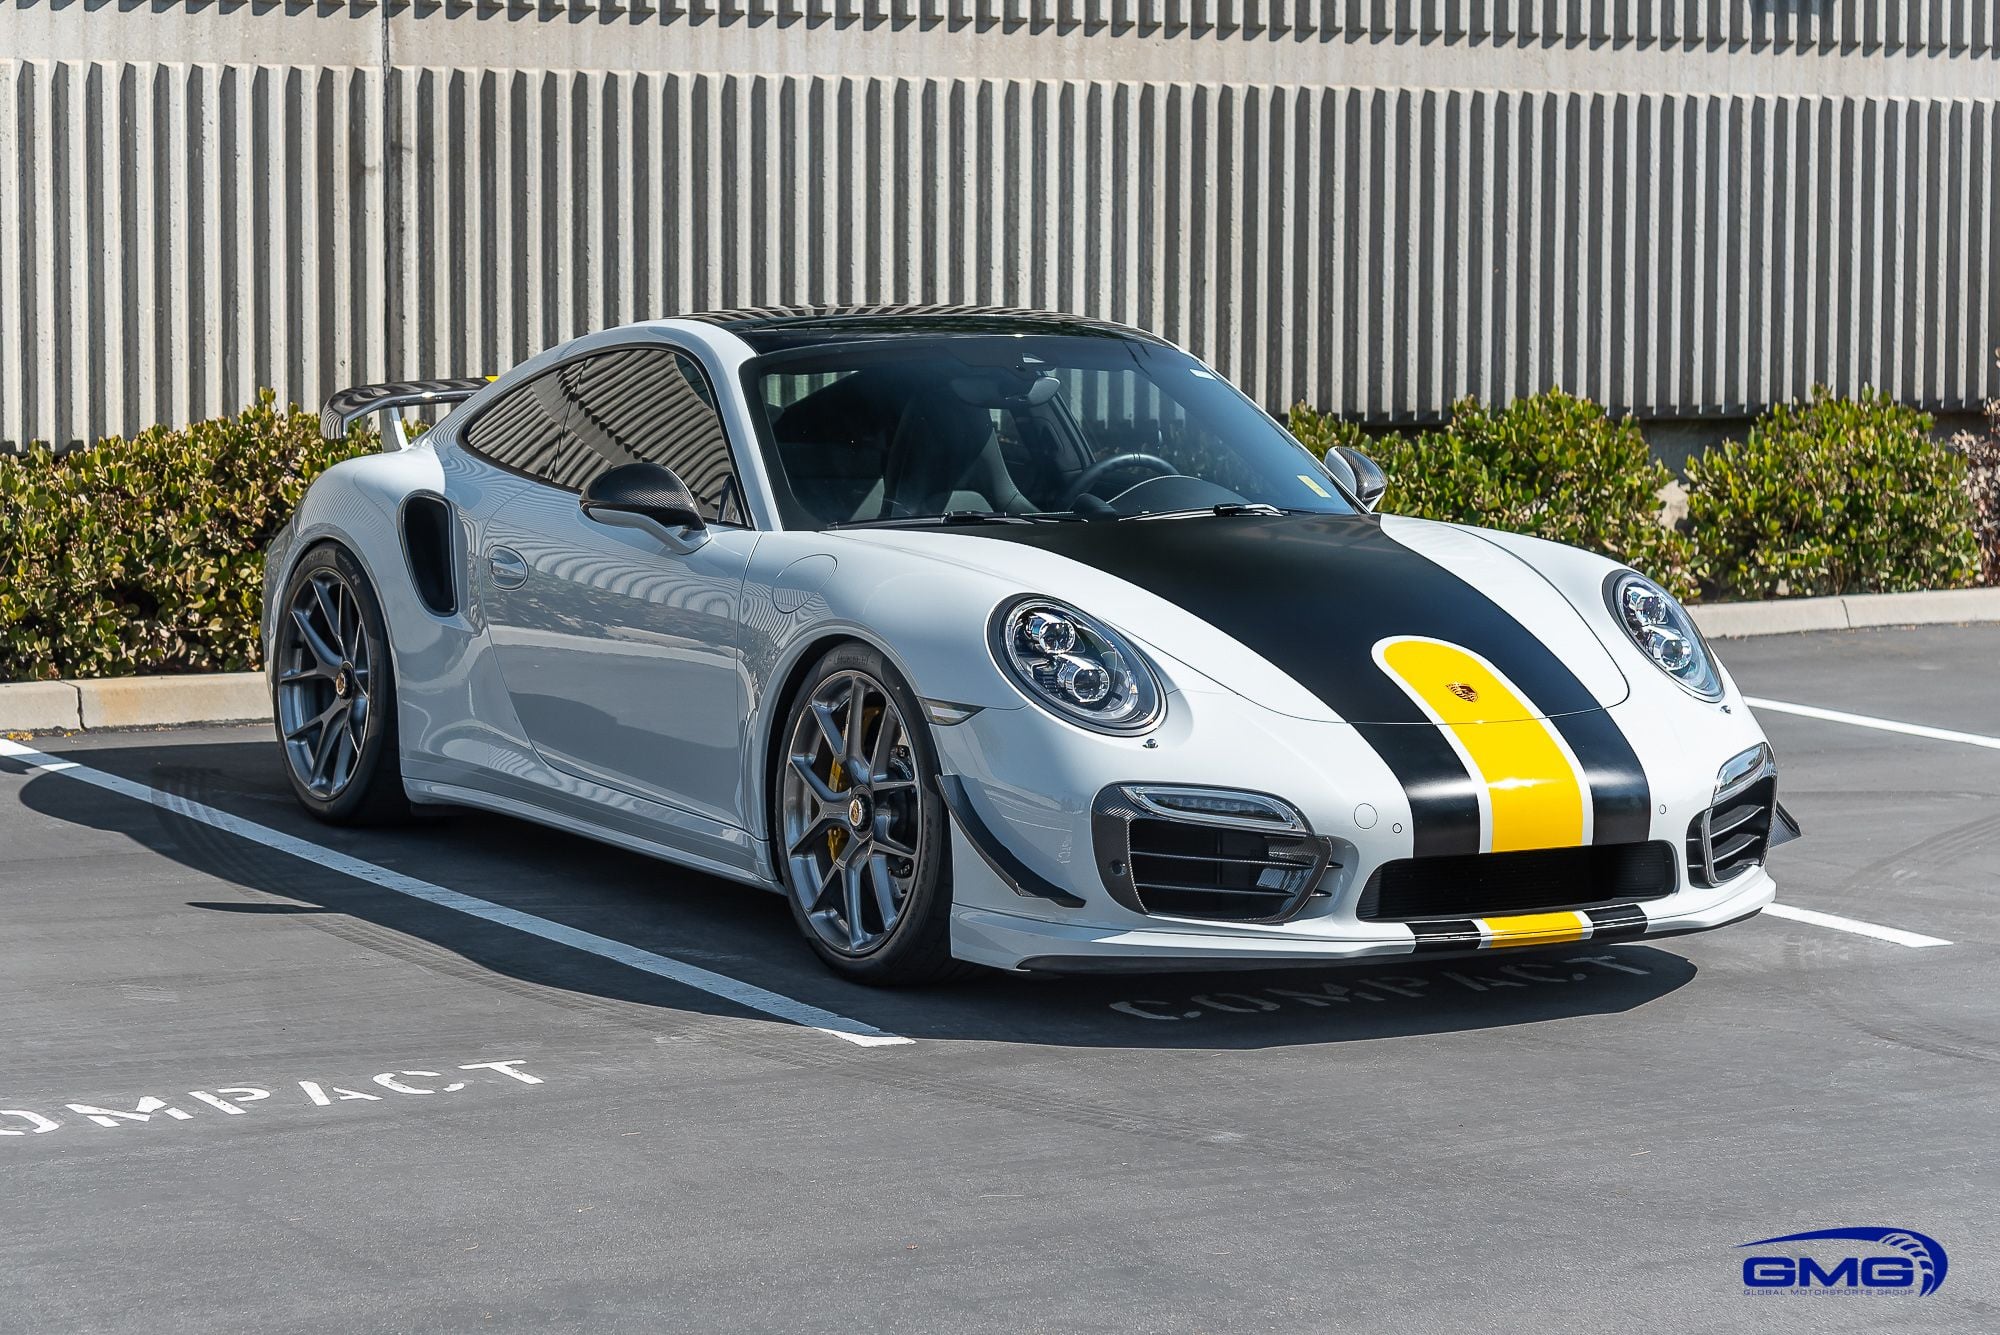 2015 Porsche 911 - GMG Racing Carrara White Metallic Porsche 991.1 Turbo S -Low miles, 1-Owner FOR SALE! - Used - VIN WP0AD2A95FS160244 - 4,842 Miles - 6 cyl - AWD - Automatic - Coupe - White - Southern California, CA 92704, United States